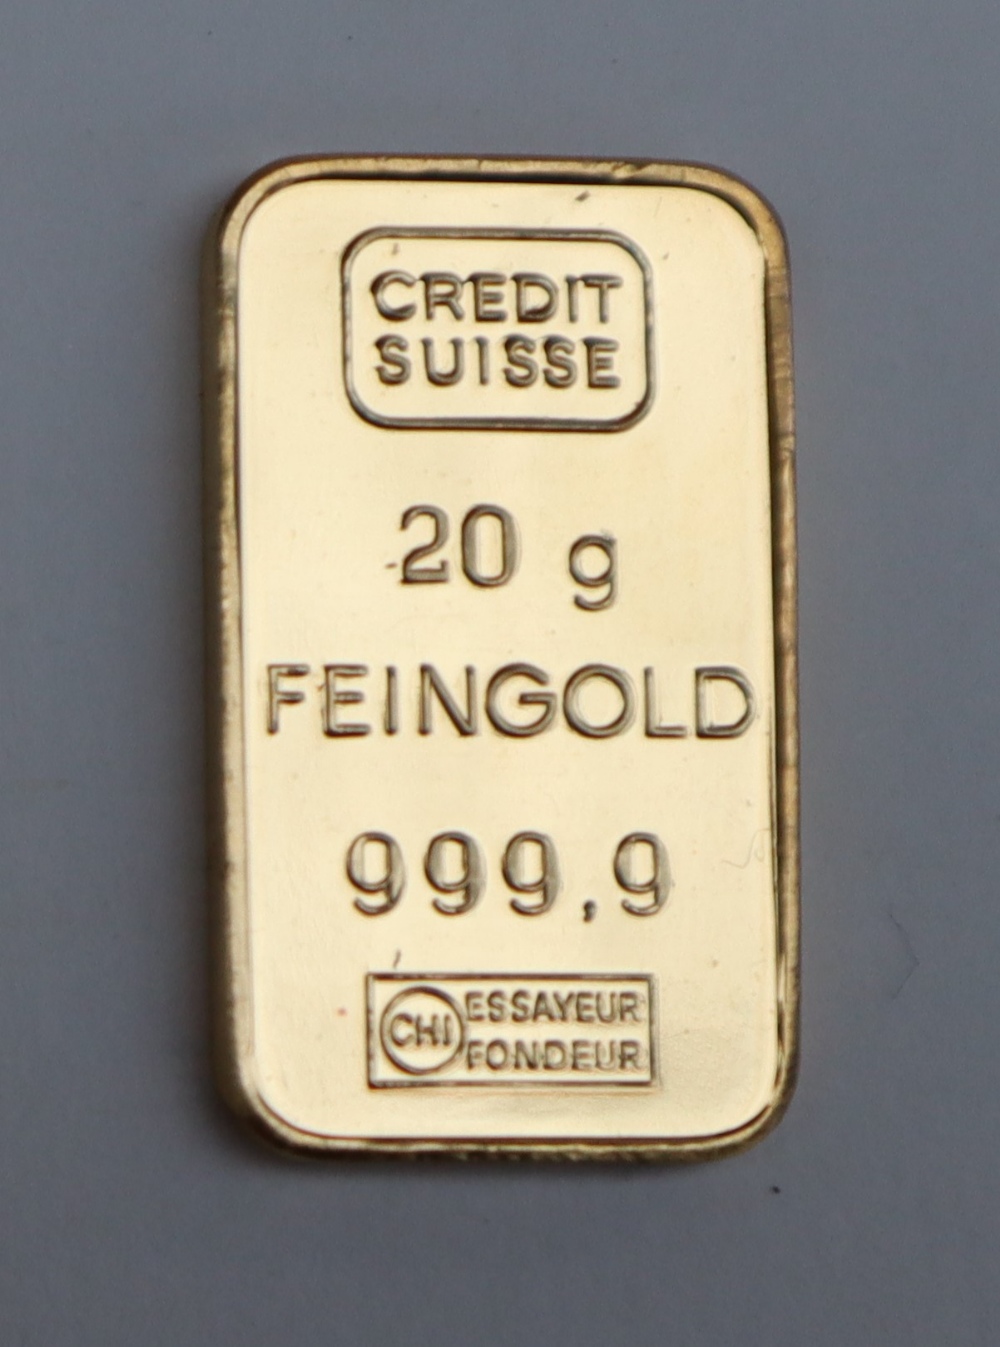 A 20g fine gold bar, stamped to one side 'Credit Suisse 20g Feingold 999.